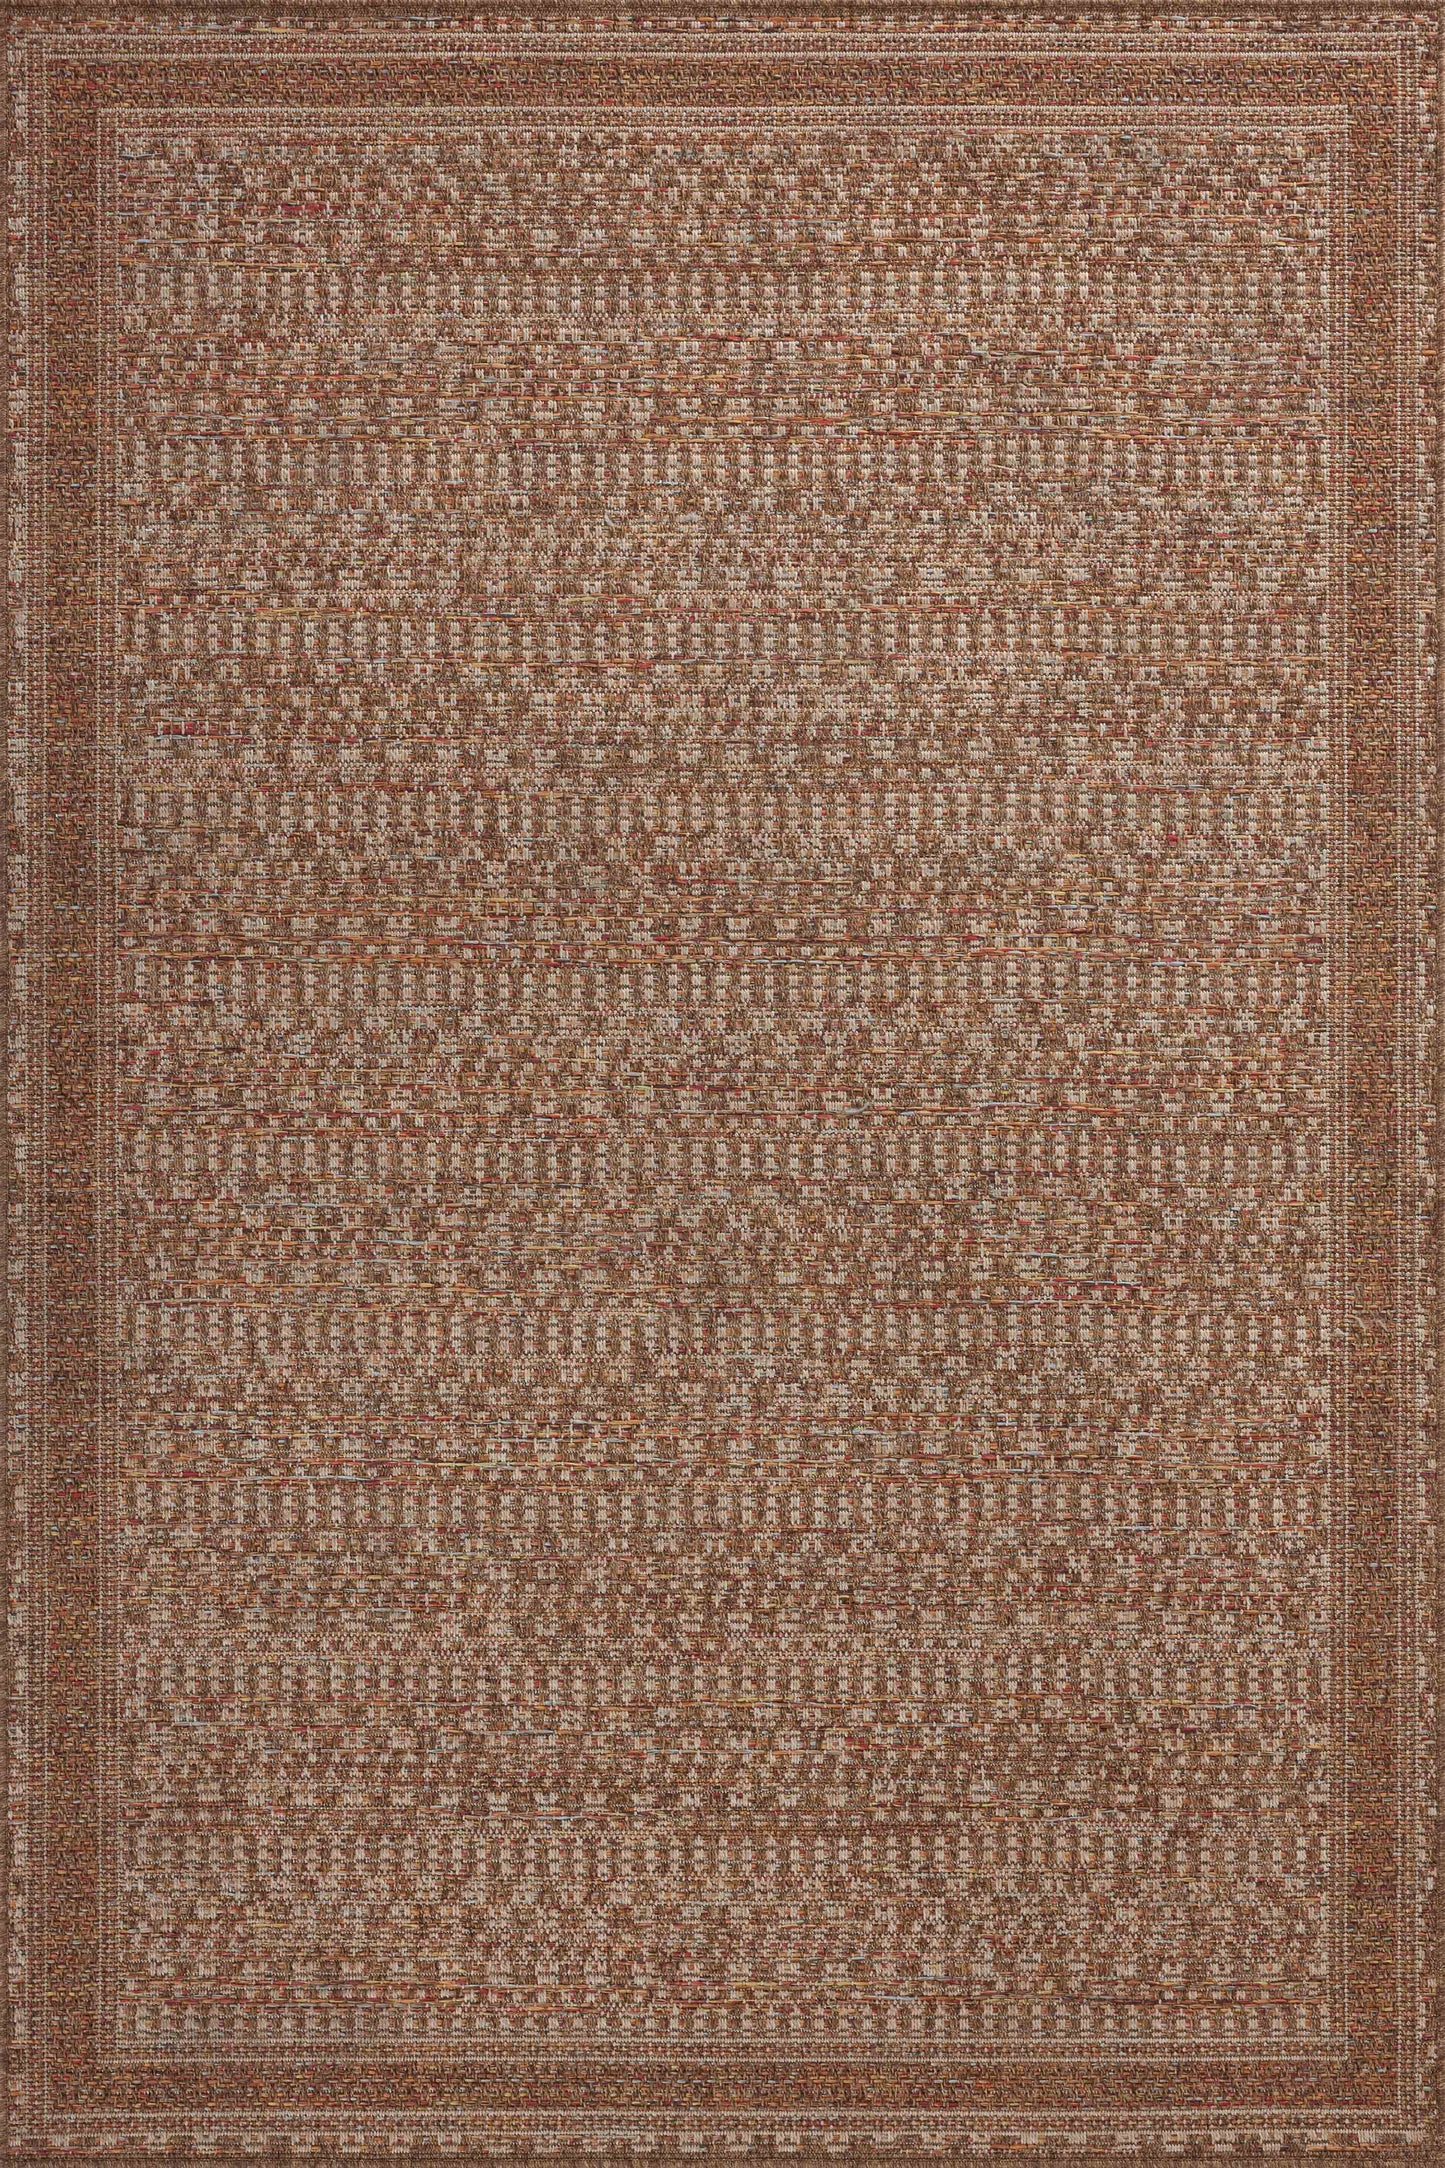 A picture of Loloi's Merrick rug, in style MER-08, color Natural / Fiesta